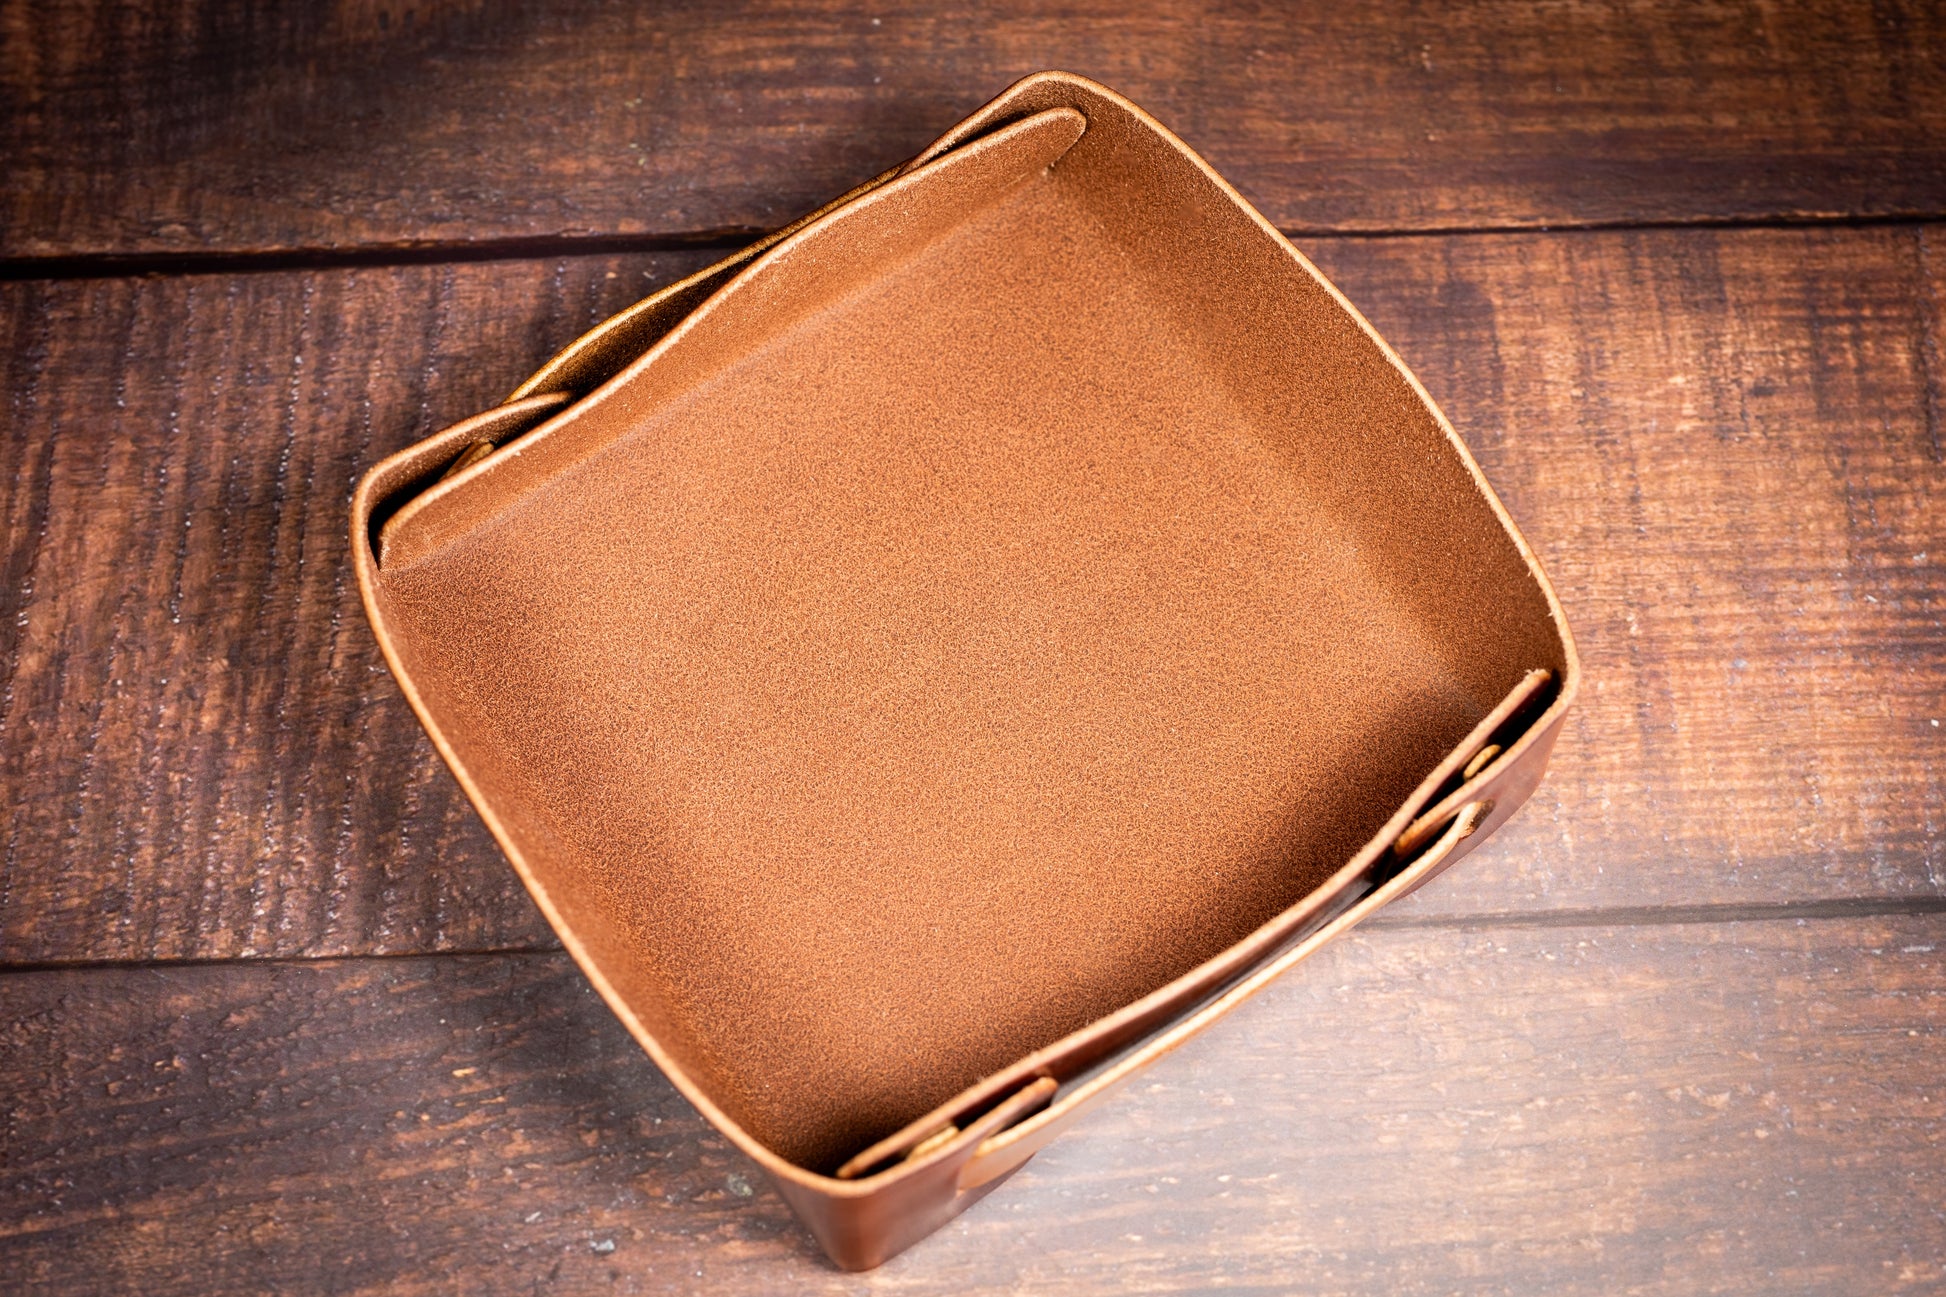 Compact and Sleek Vegetable-Tanned Leather Tray - Combining Practicality with Luxury